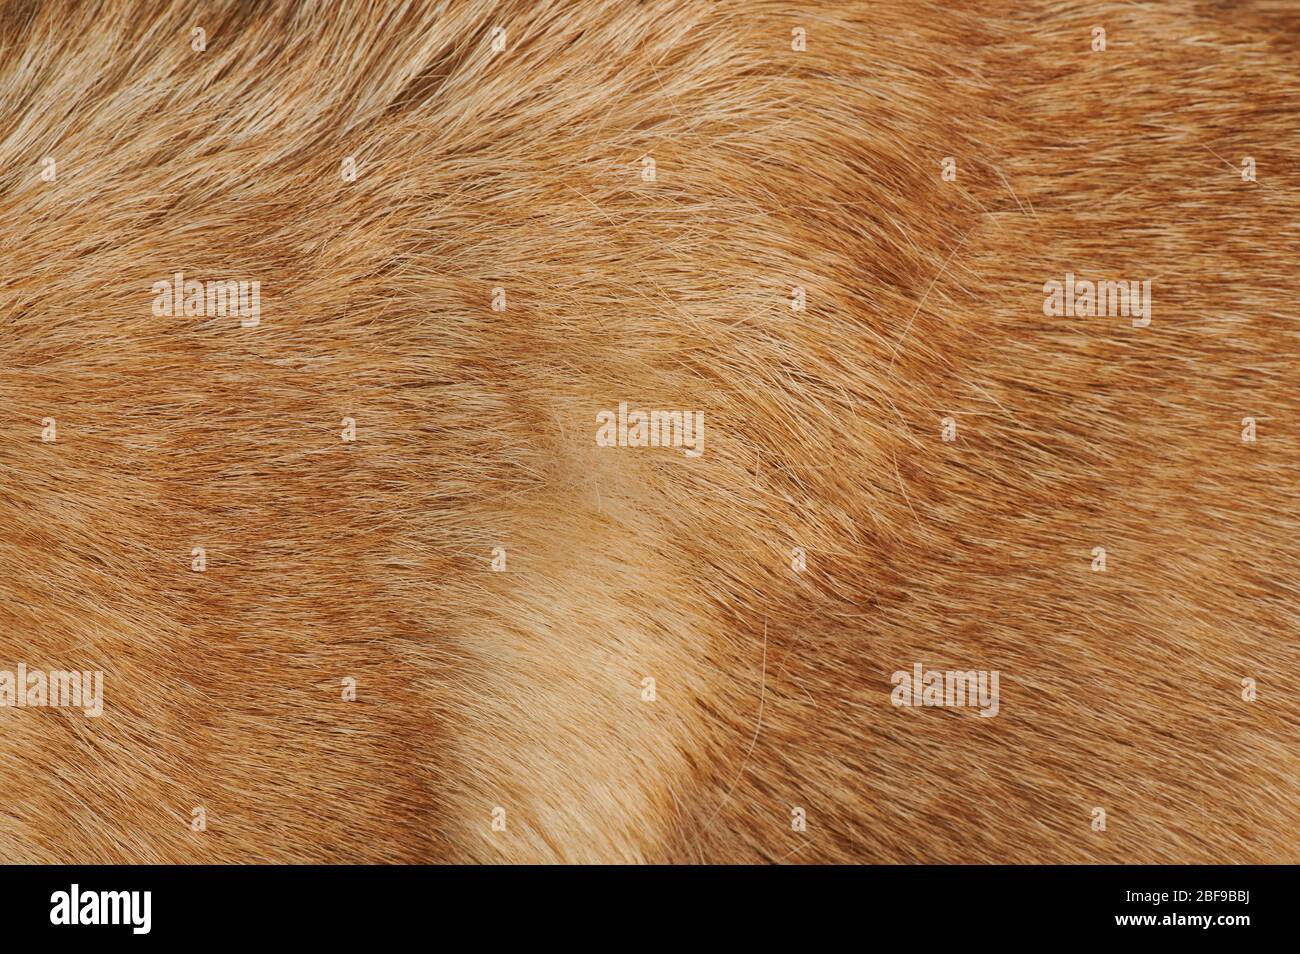 Brown dog hair texture close up view. Clean animal fur Stock Photo